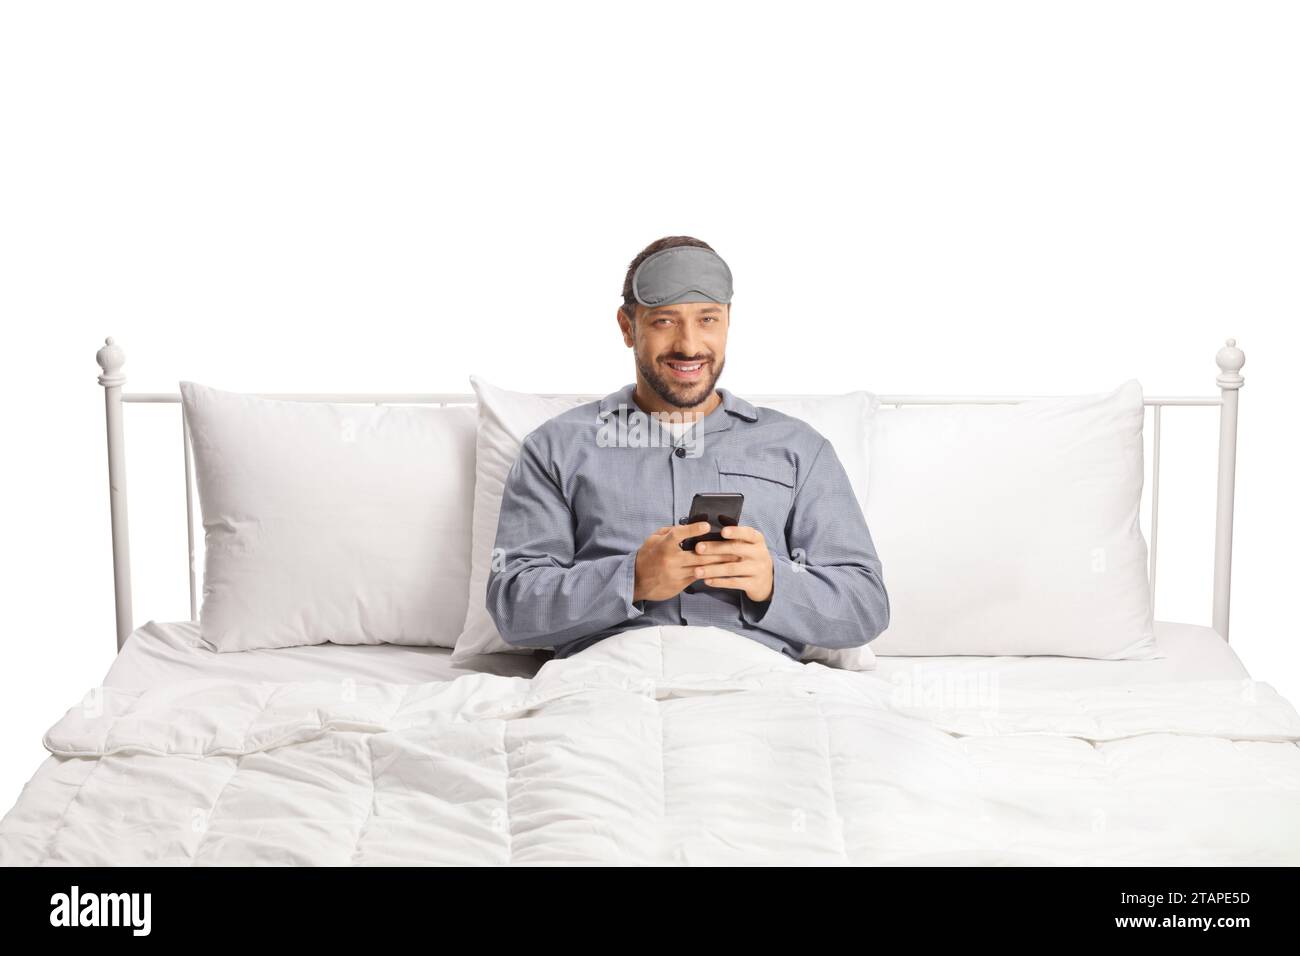 Man in pajamas sitting in a bed and holding a smartphone isolated on white background Stock Photo